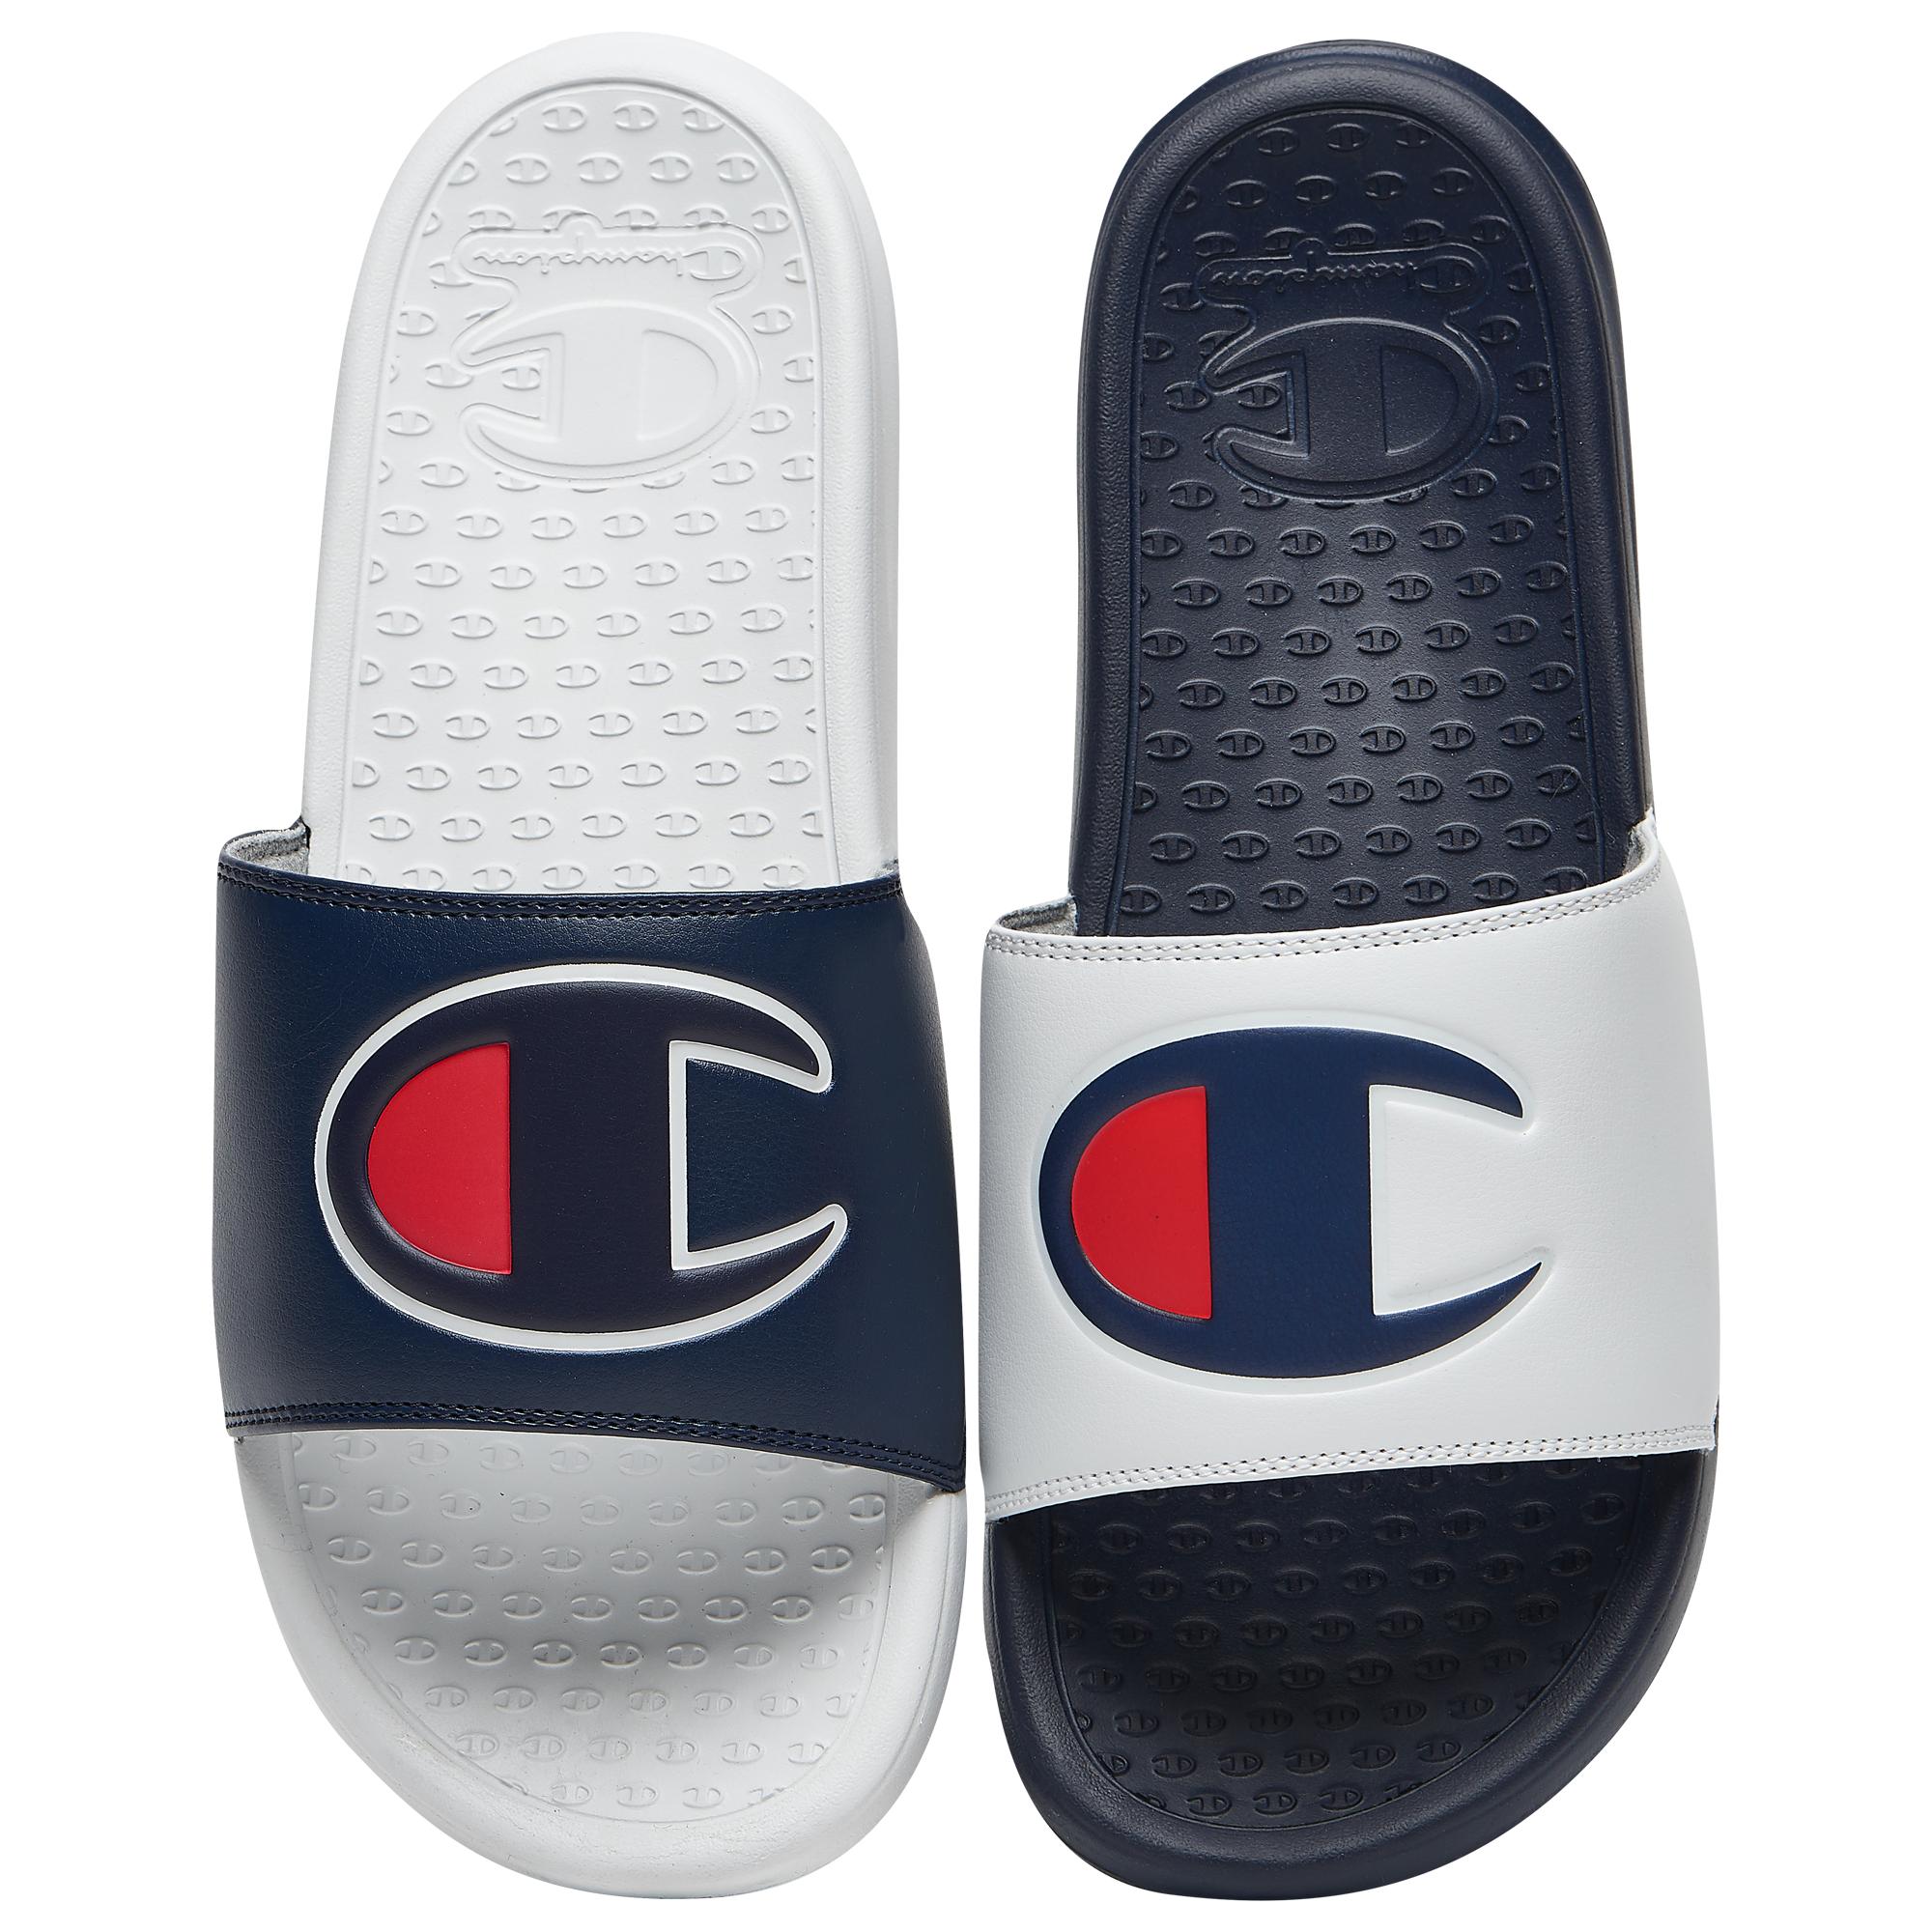 yeezy slides with strap